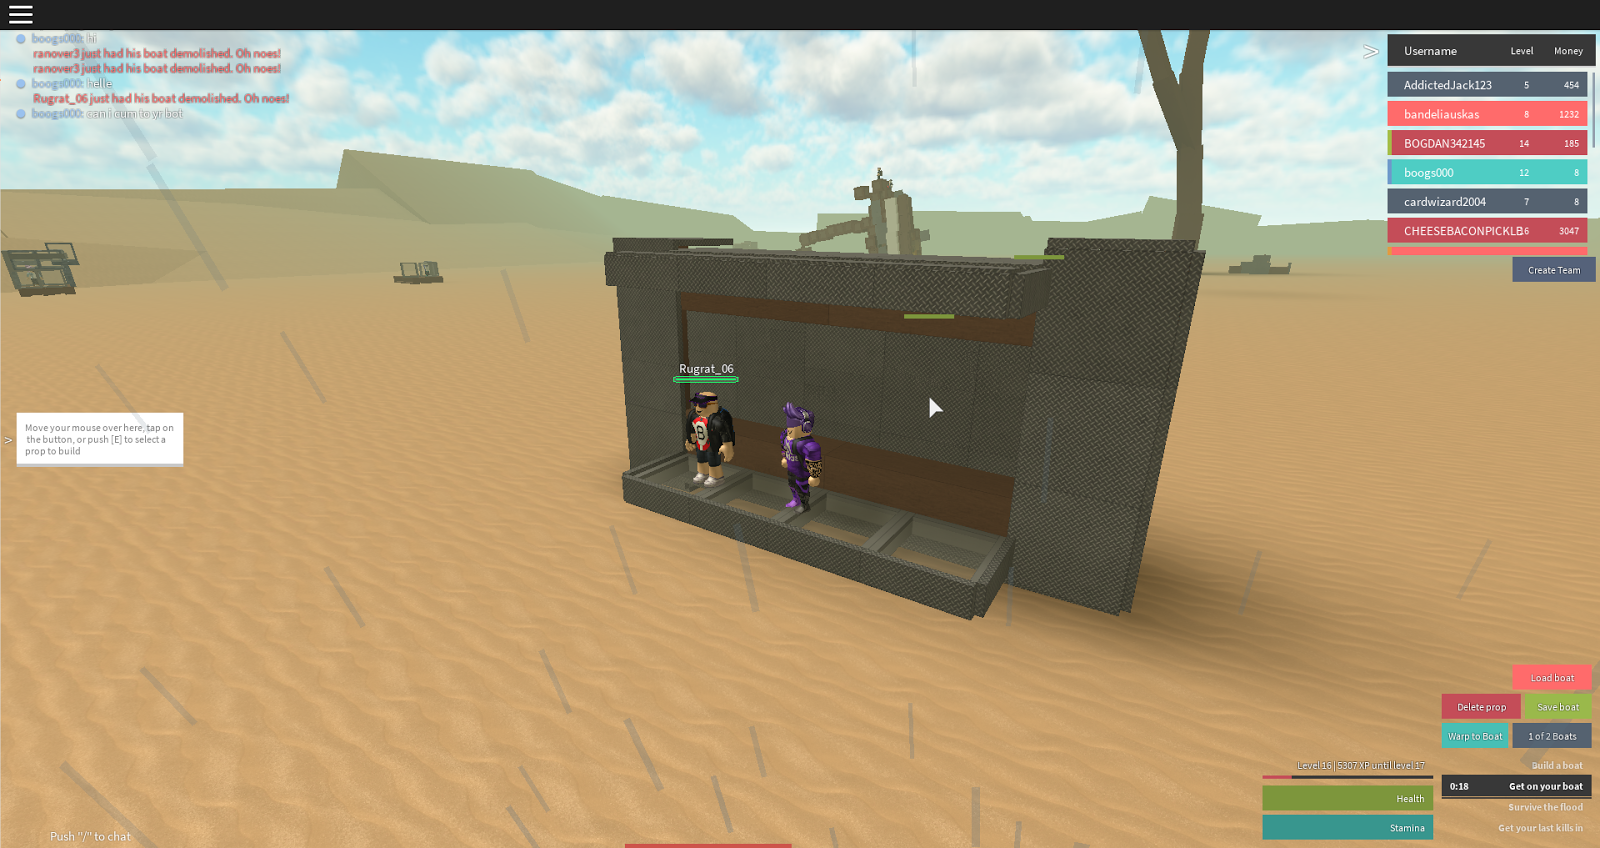 For Gamers Like Me Whatever Floats Your Boat A Free Survival Game On Roblox - roblox build a boat to survive a flood